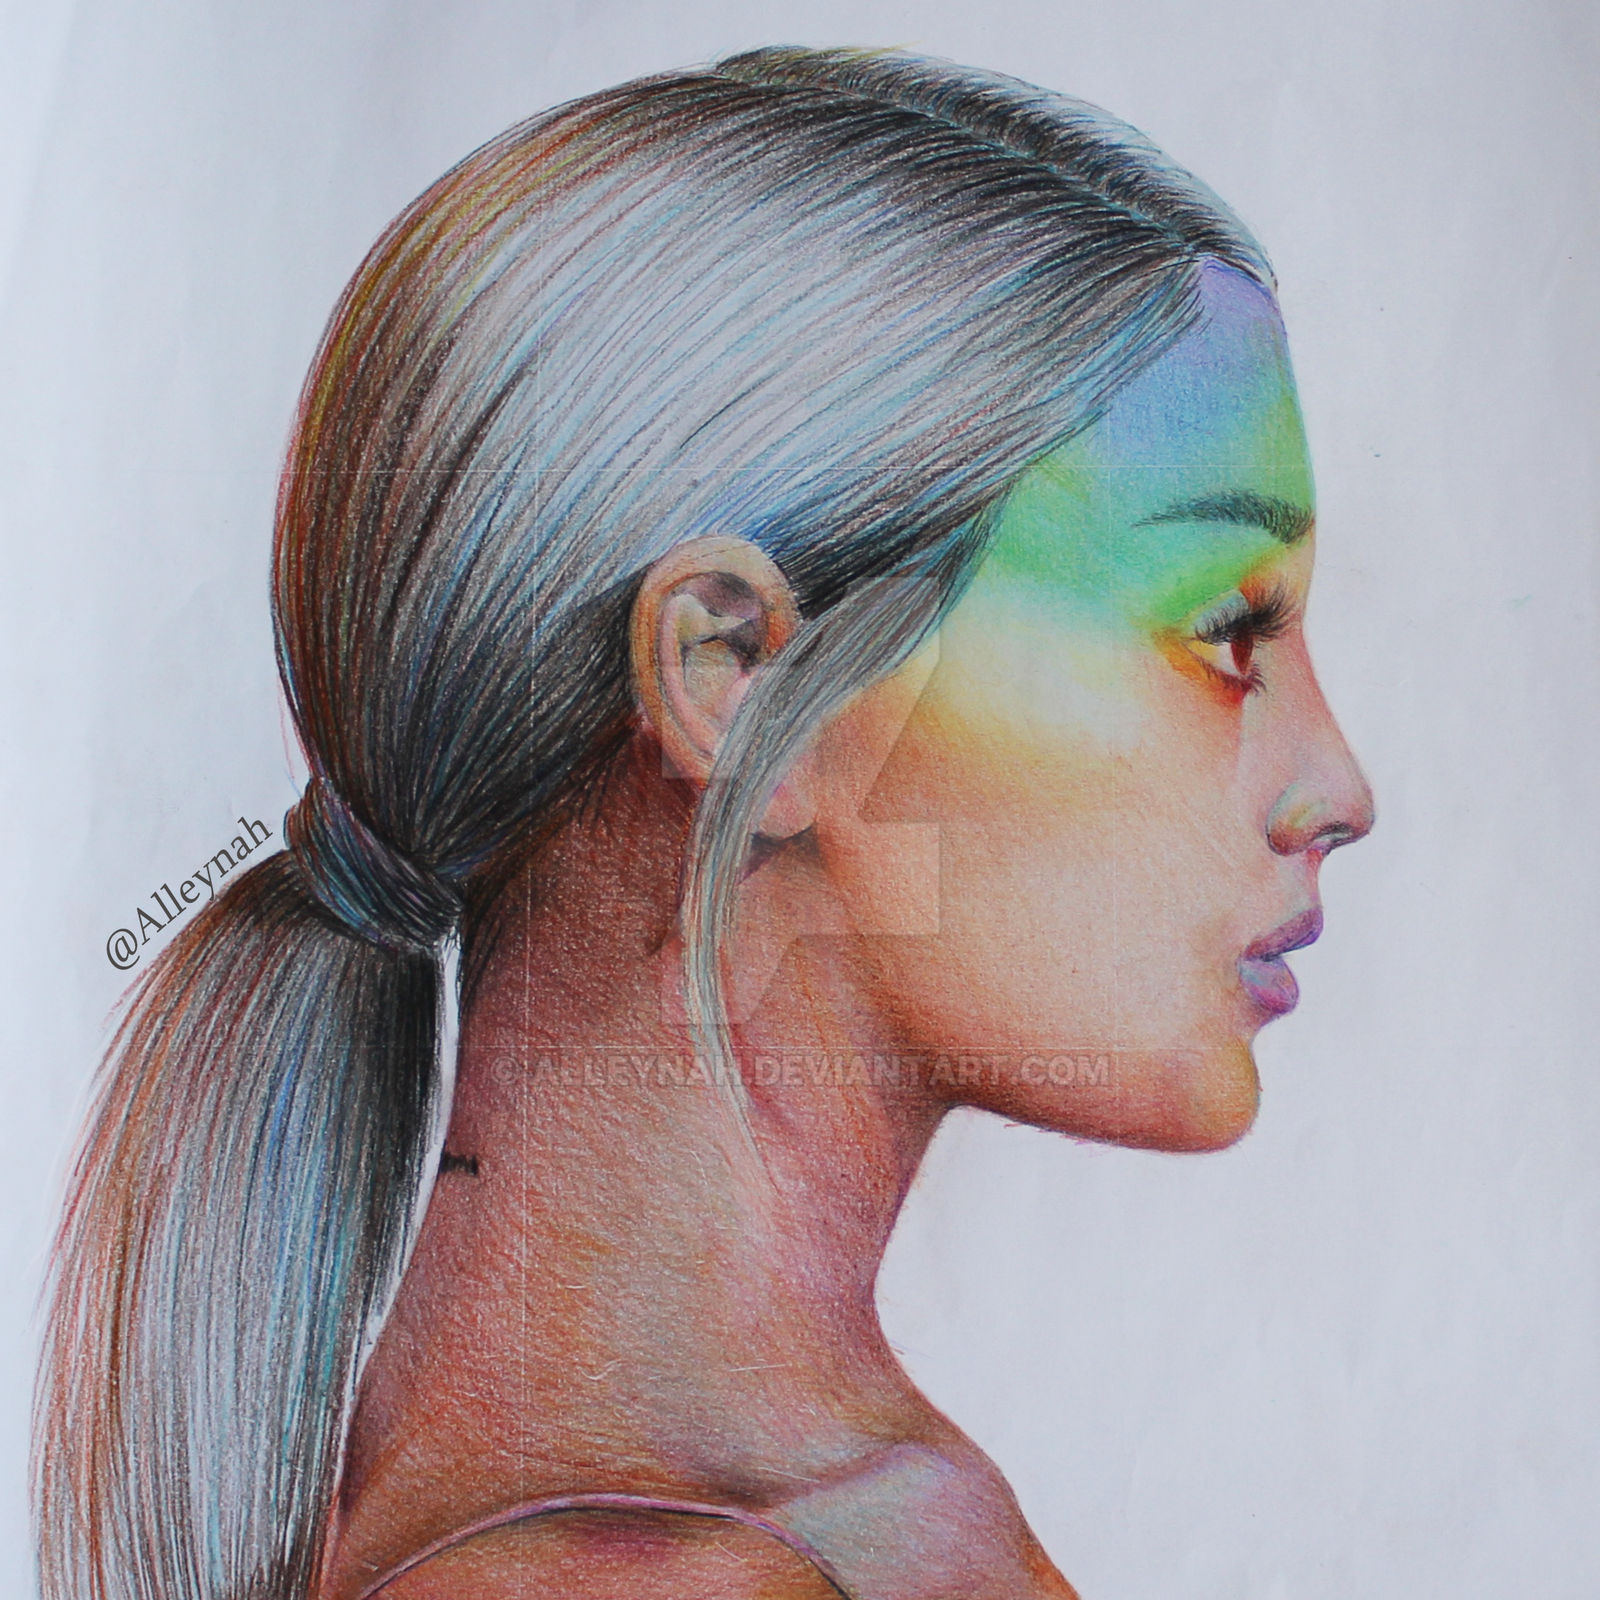 Ariana Grande No Tears Left To Cry By Alleynah On Deviantart